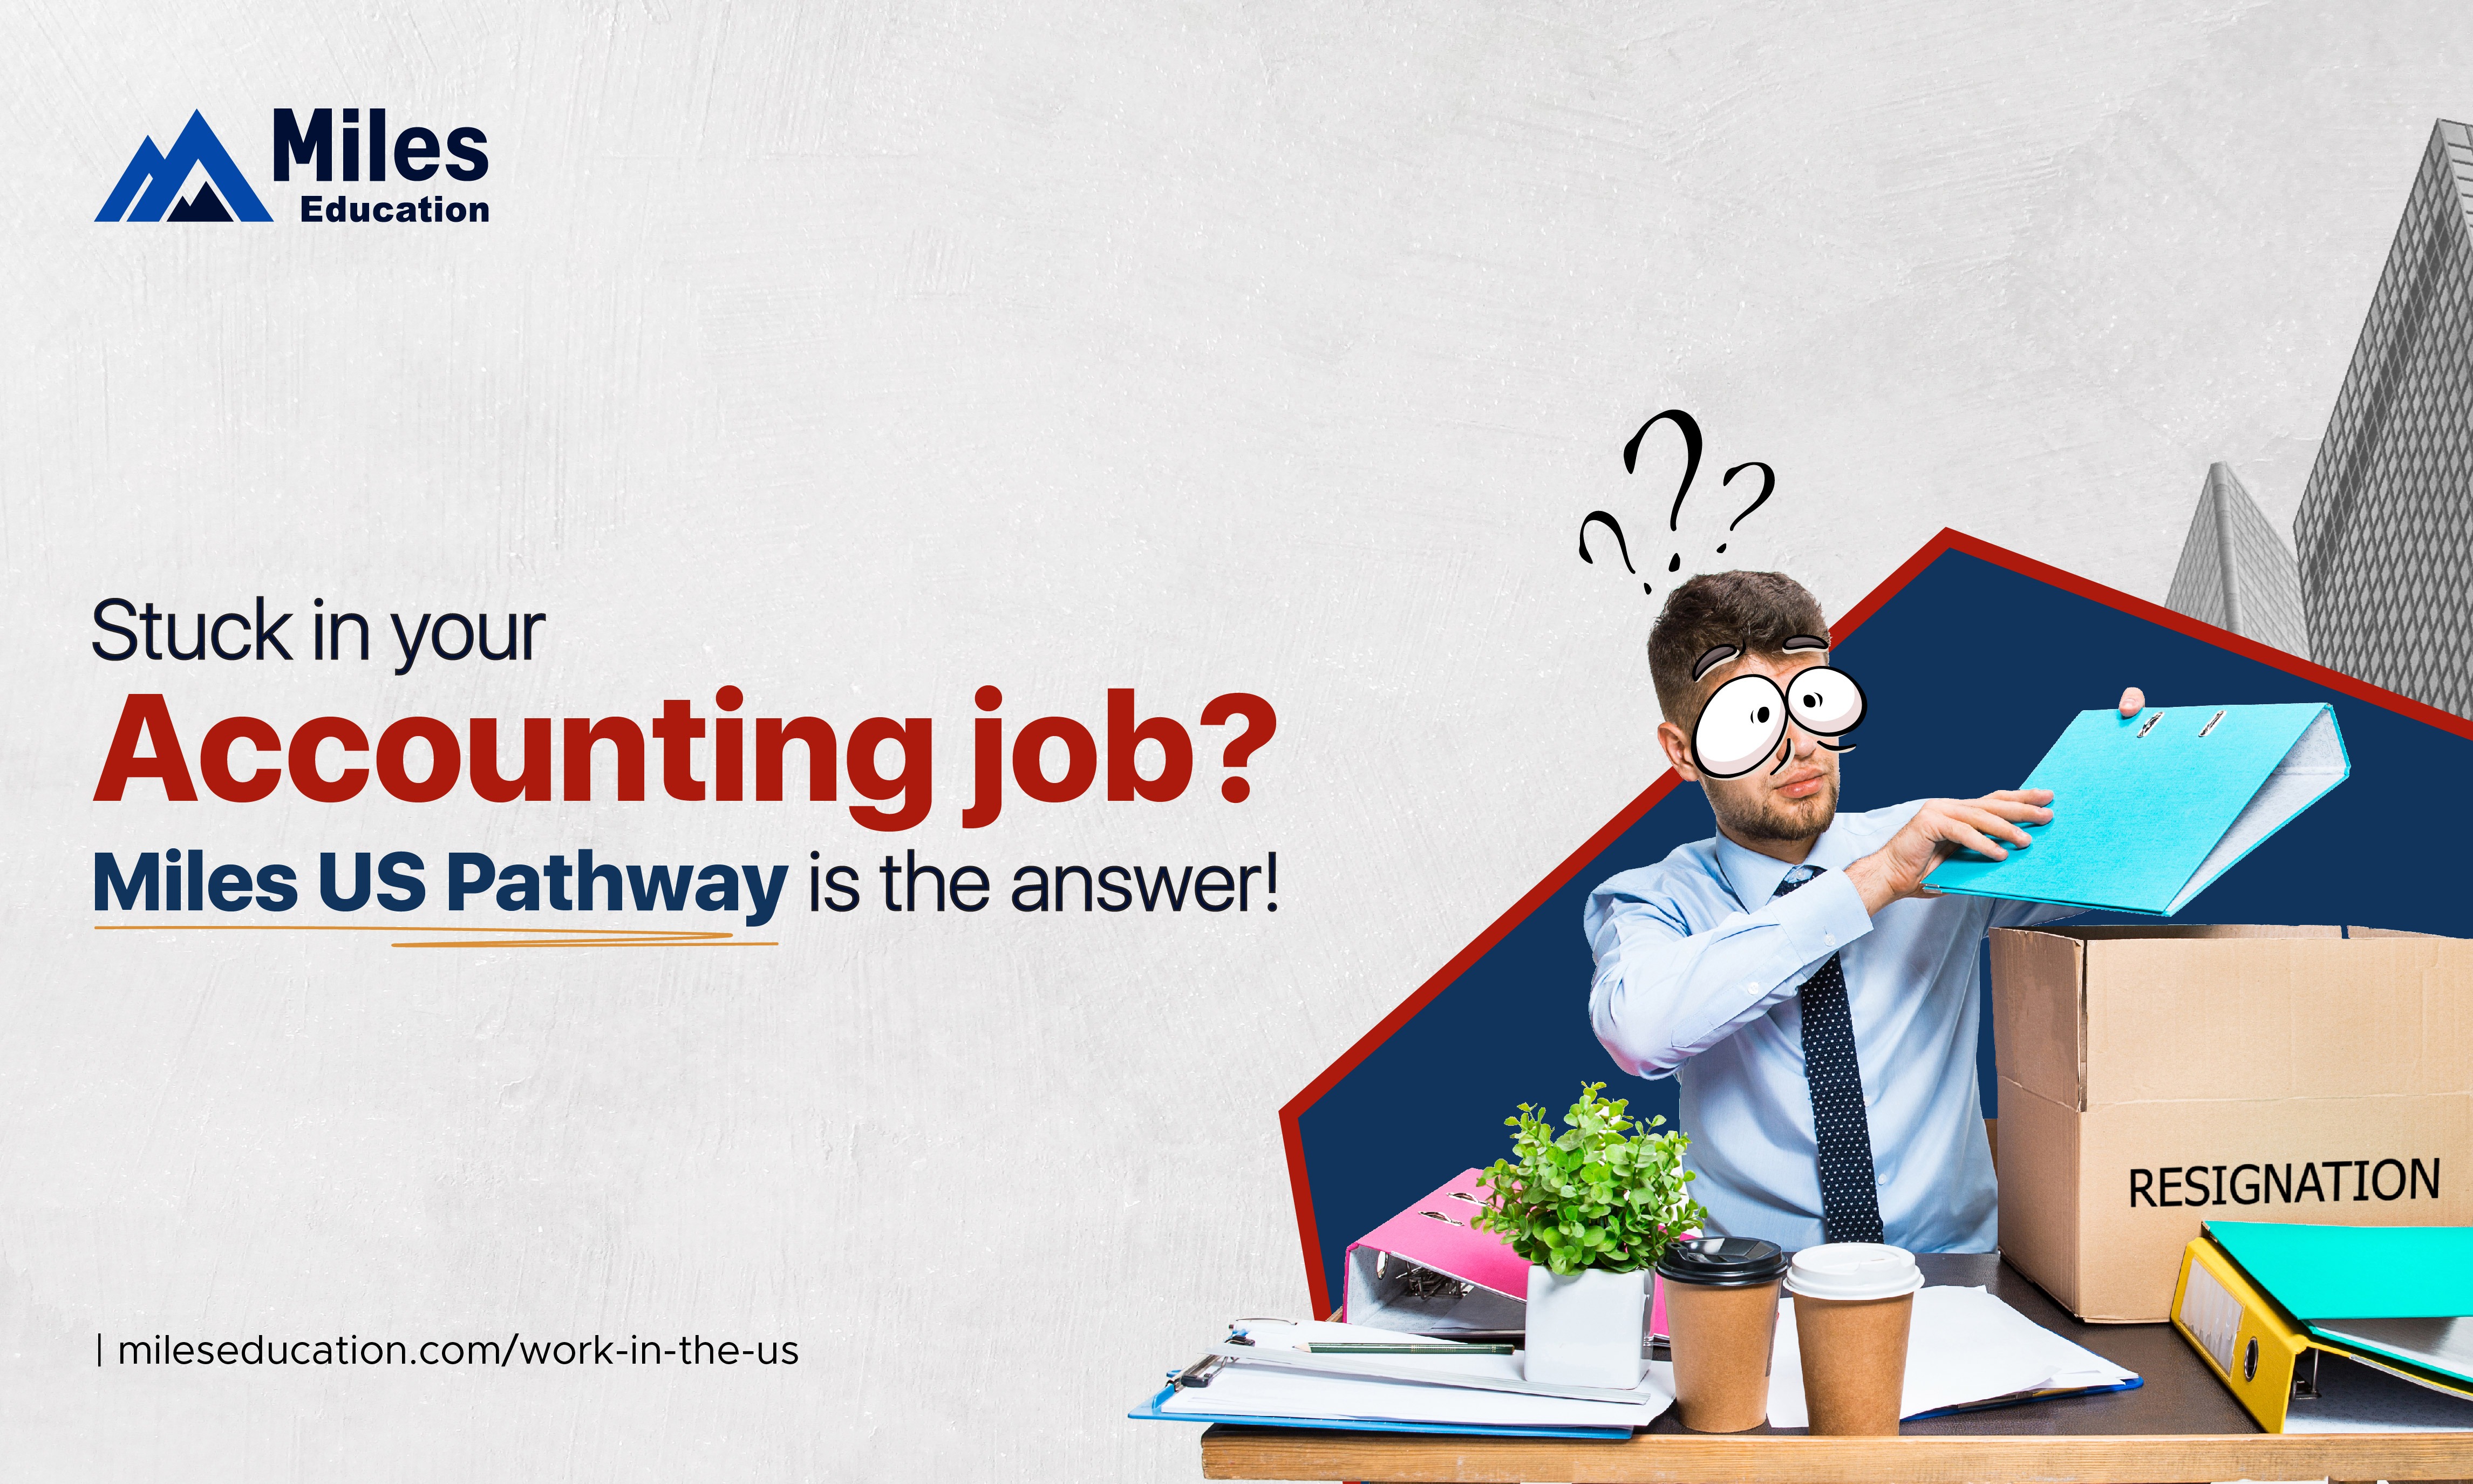 Stuck in Your Accounting Job? Miles U.S. Pathway is the Answer